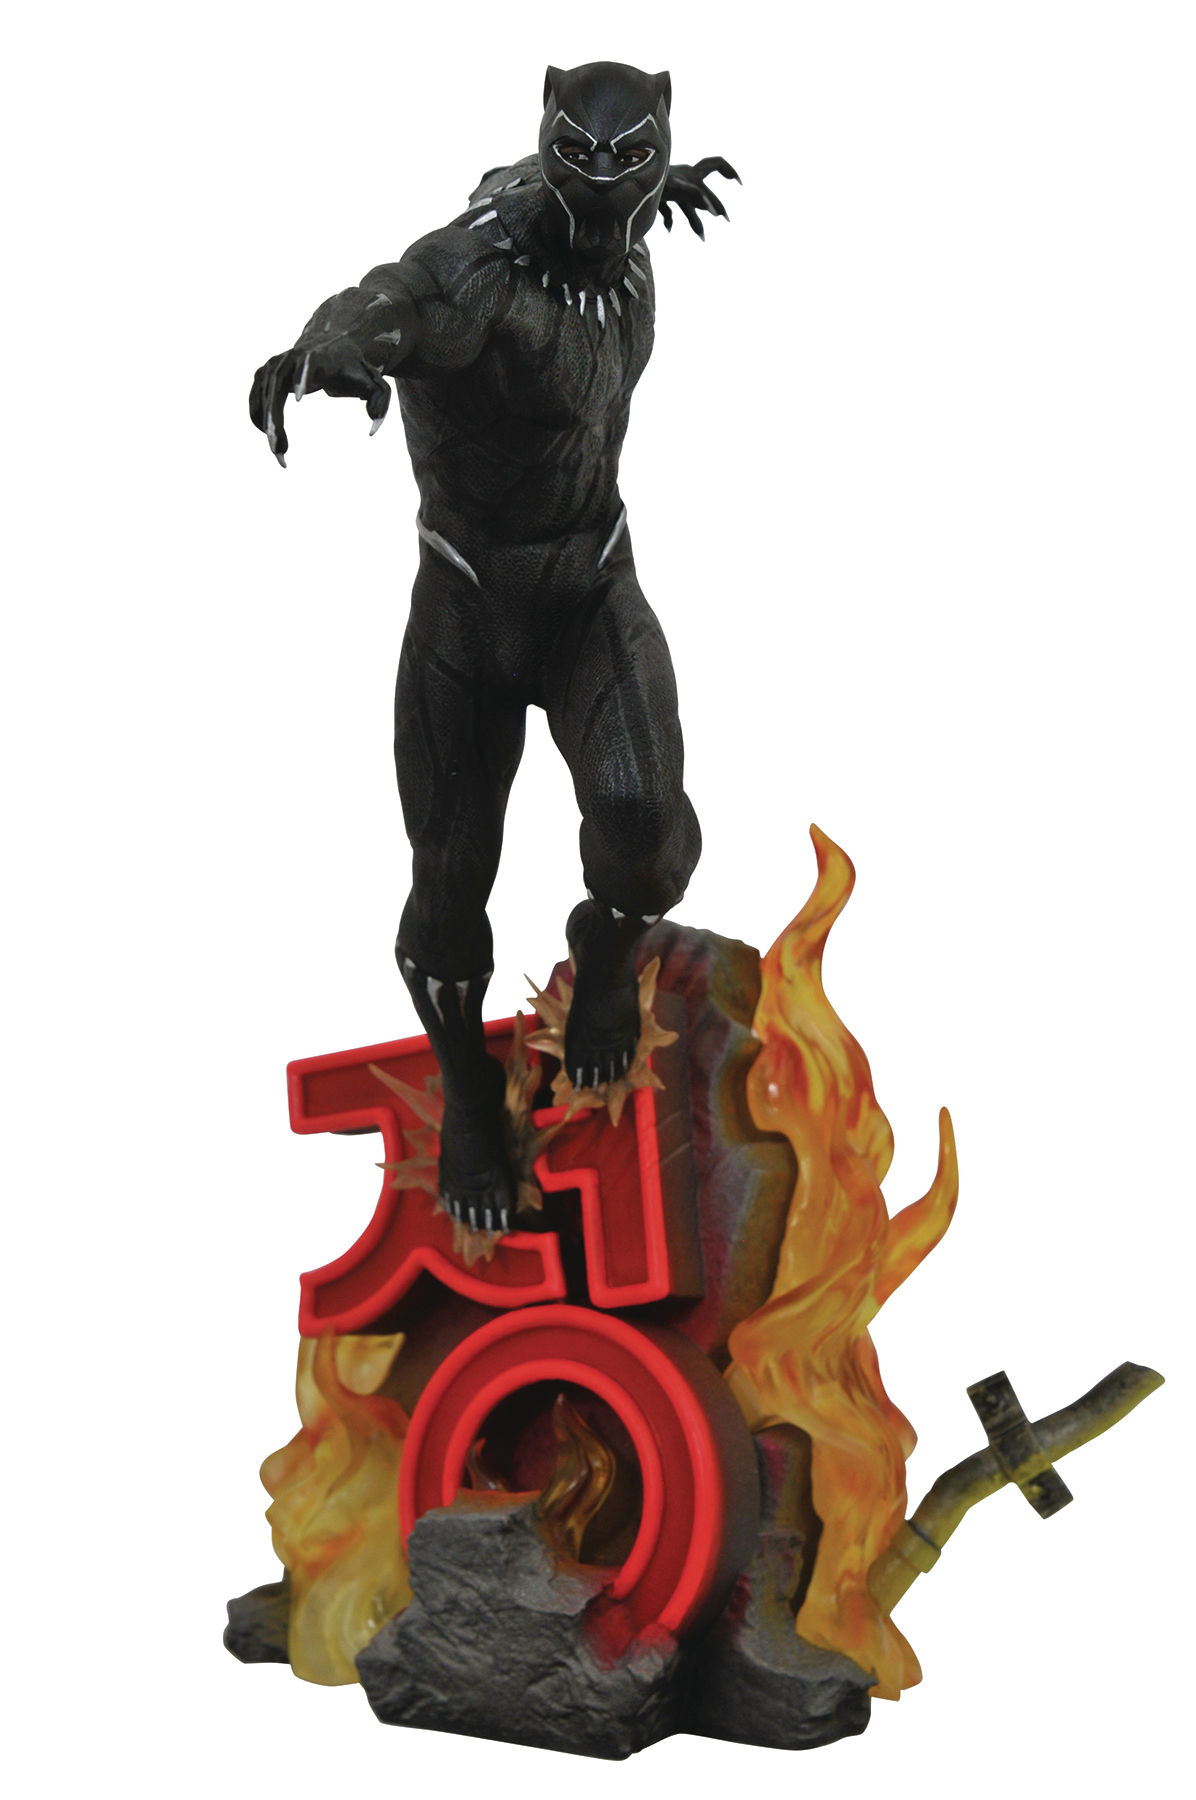 MARVEL PREMIER COLLECTION BLACK PANTHER MOVIE STATUE